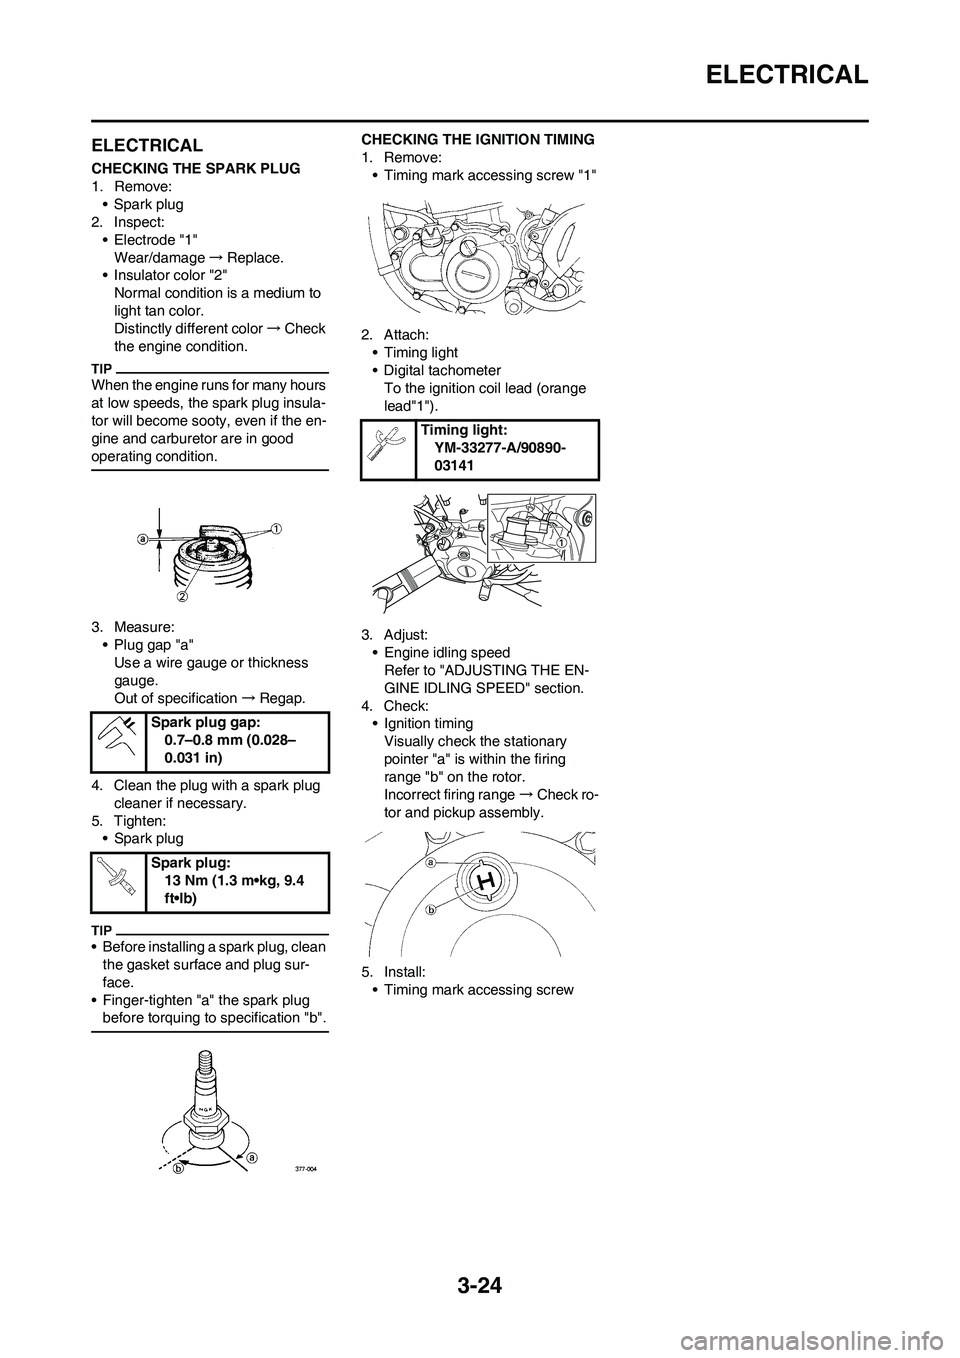 YAMAHA YZ450F 2009  Owners Manual 3-24
ELECTRICAL
ELECTRICAL
CHECKING THE SPARK PLUG
1. Remove:
• Spark plug
2. Inspect:
• Electrode "1"
Wear/damage→Replace.
• Insulator color "2"
Normal condition is a medium to 
light tan col